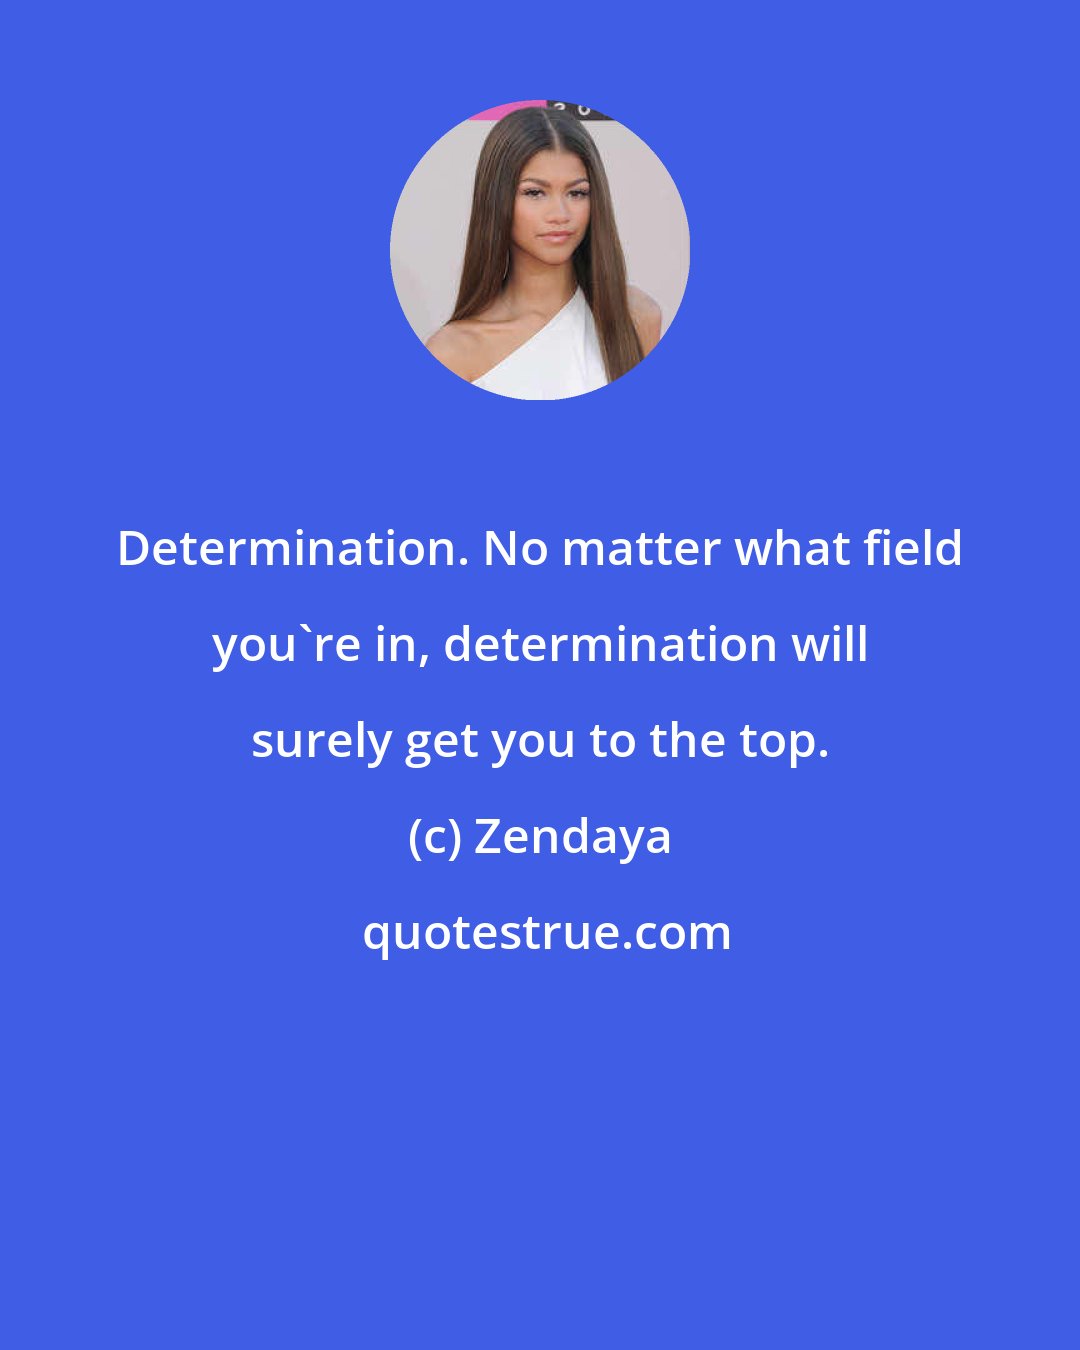 Zendaya: Determination. No matter what field you're in, determination will surely get you to the top.